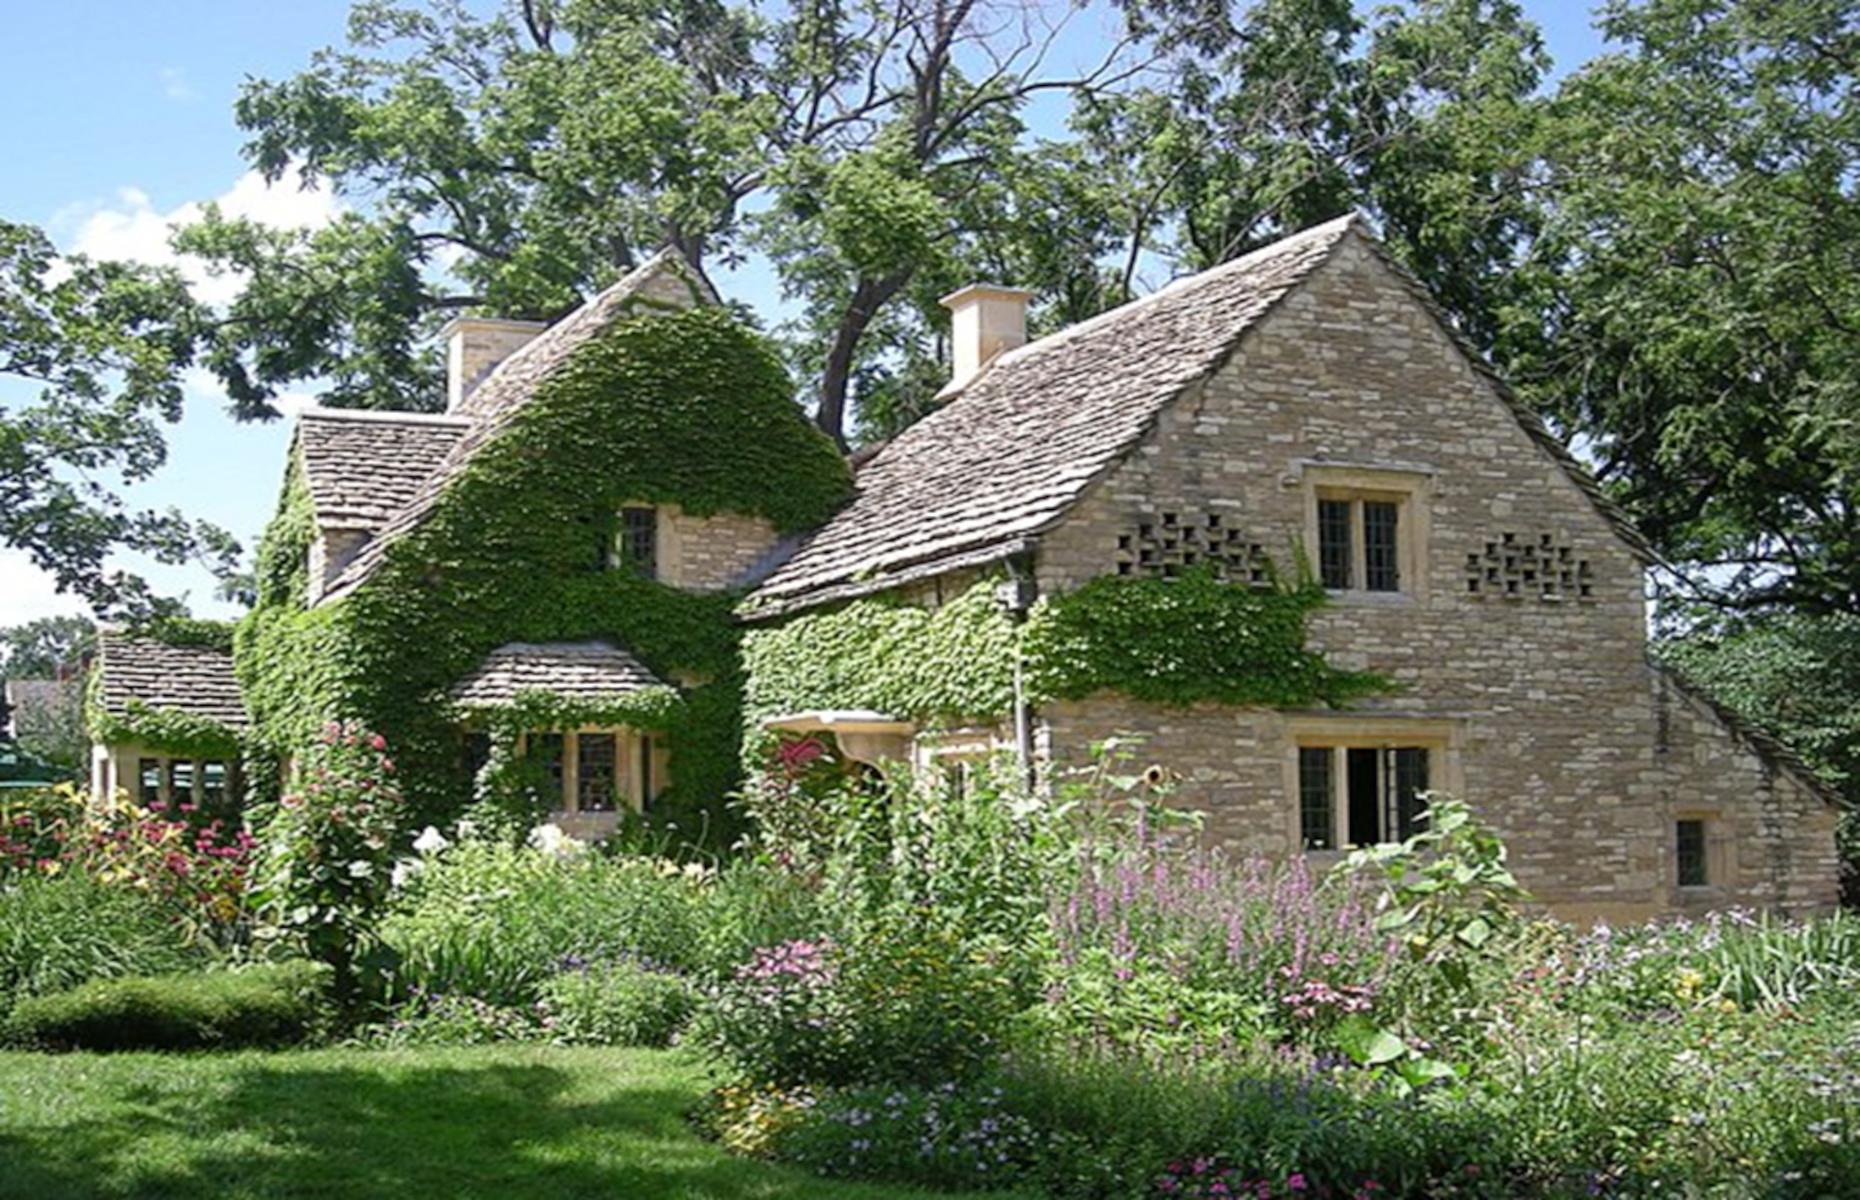 <p>An architectural highlight of the village, though it might seem slightly incongruous with its surroundings, is this 1619 Cotswold Cottage, imported from England. Over several visits to England in the 1920s, Henry Ford fell in love with the quaint and characteristic Cotswolds architecture. By 1929, so great was his love for these buildings that he decided to purchase, deconstruct, and move a Cotswolds cottage all the way to his home in Greenfield, Michigan, where it was reassembled and still stands to this day.</p>